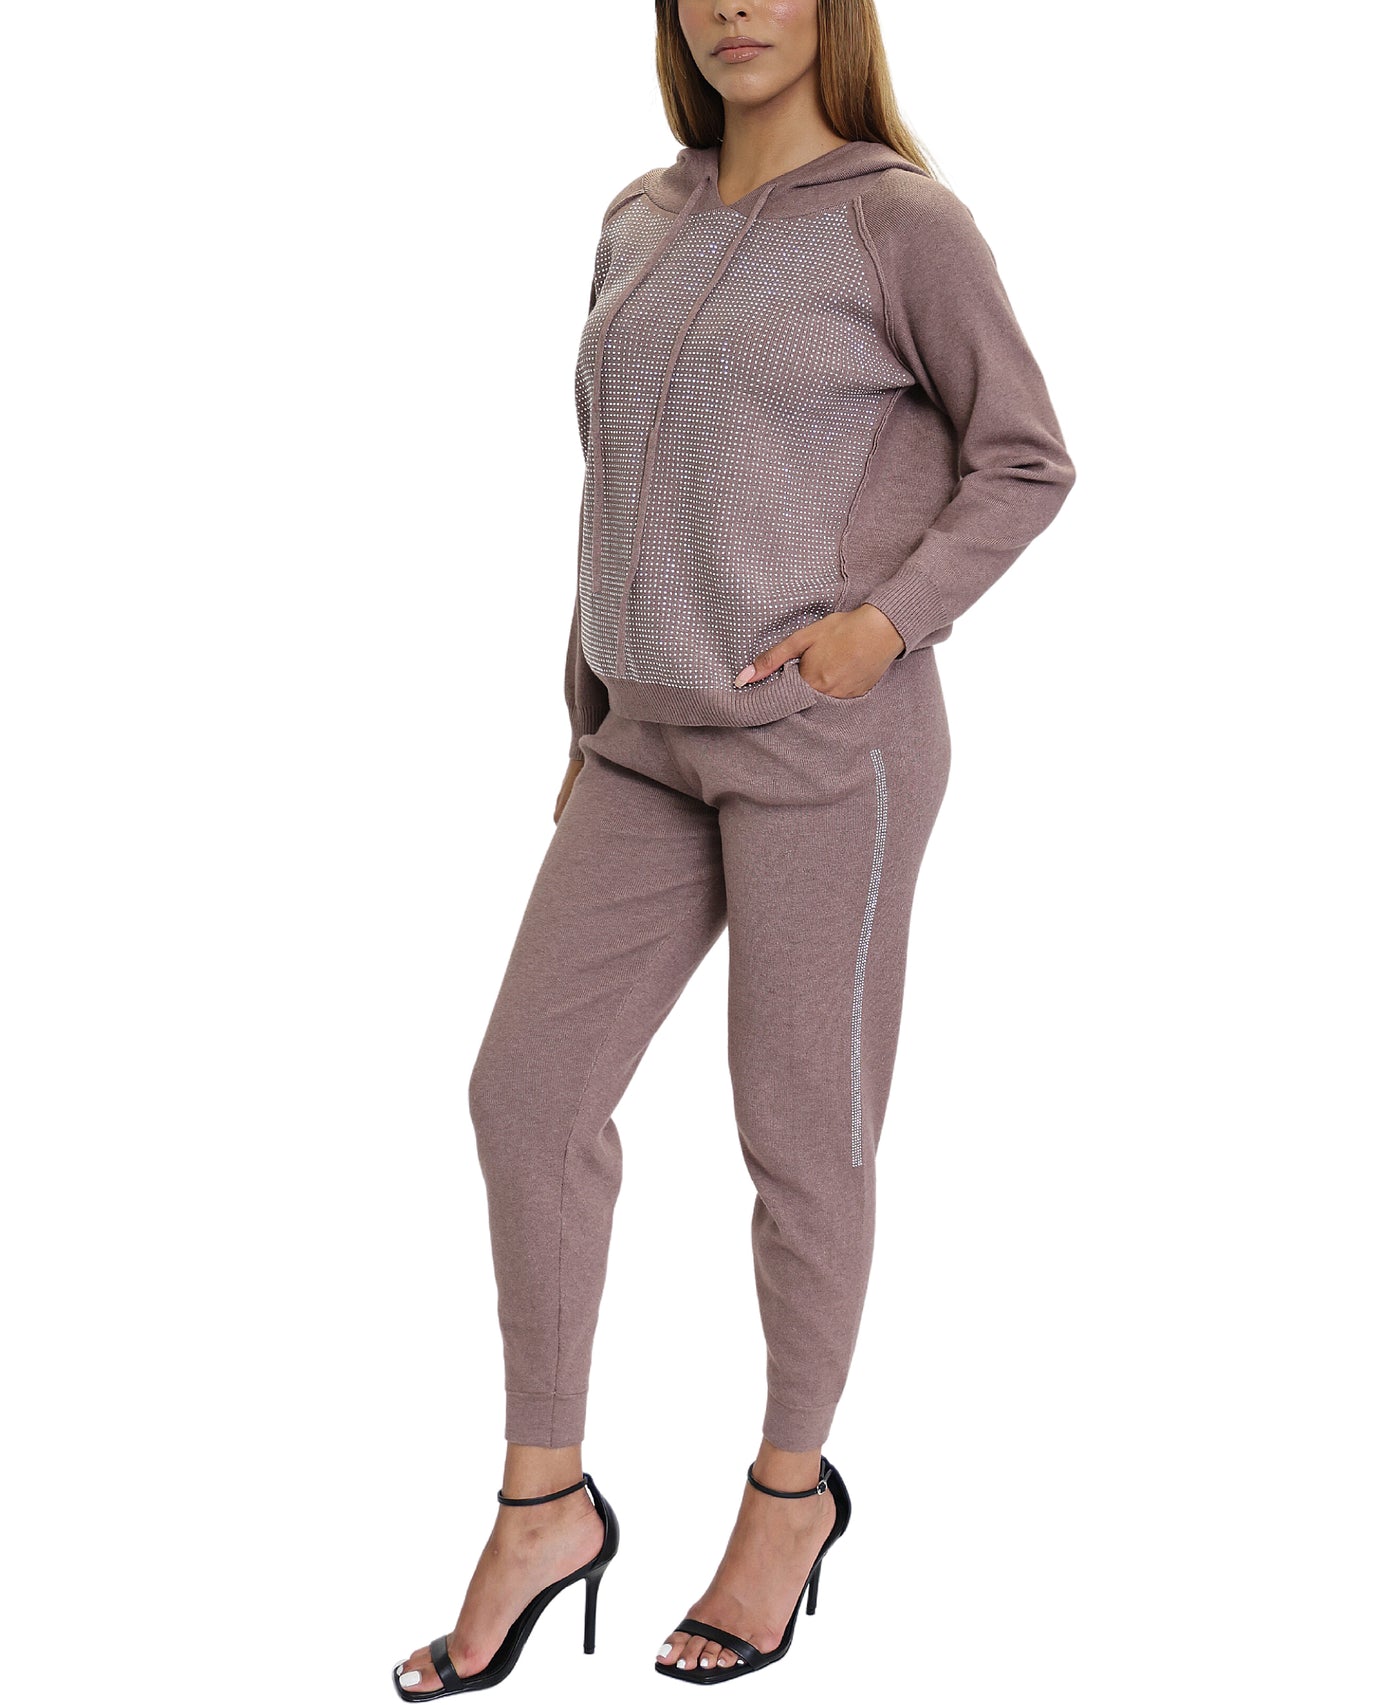 Knit Studded Hoodie Top and Jogger Set- 2 Pc Set image 1